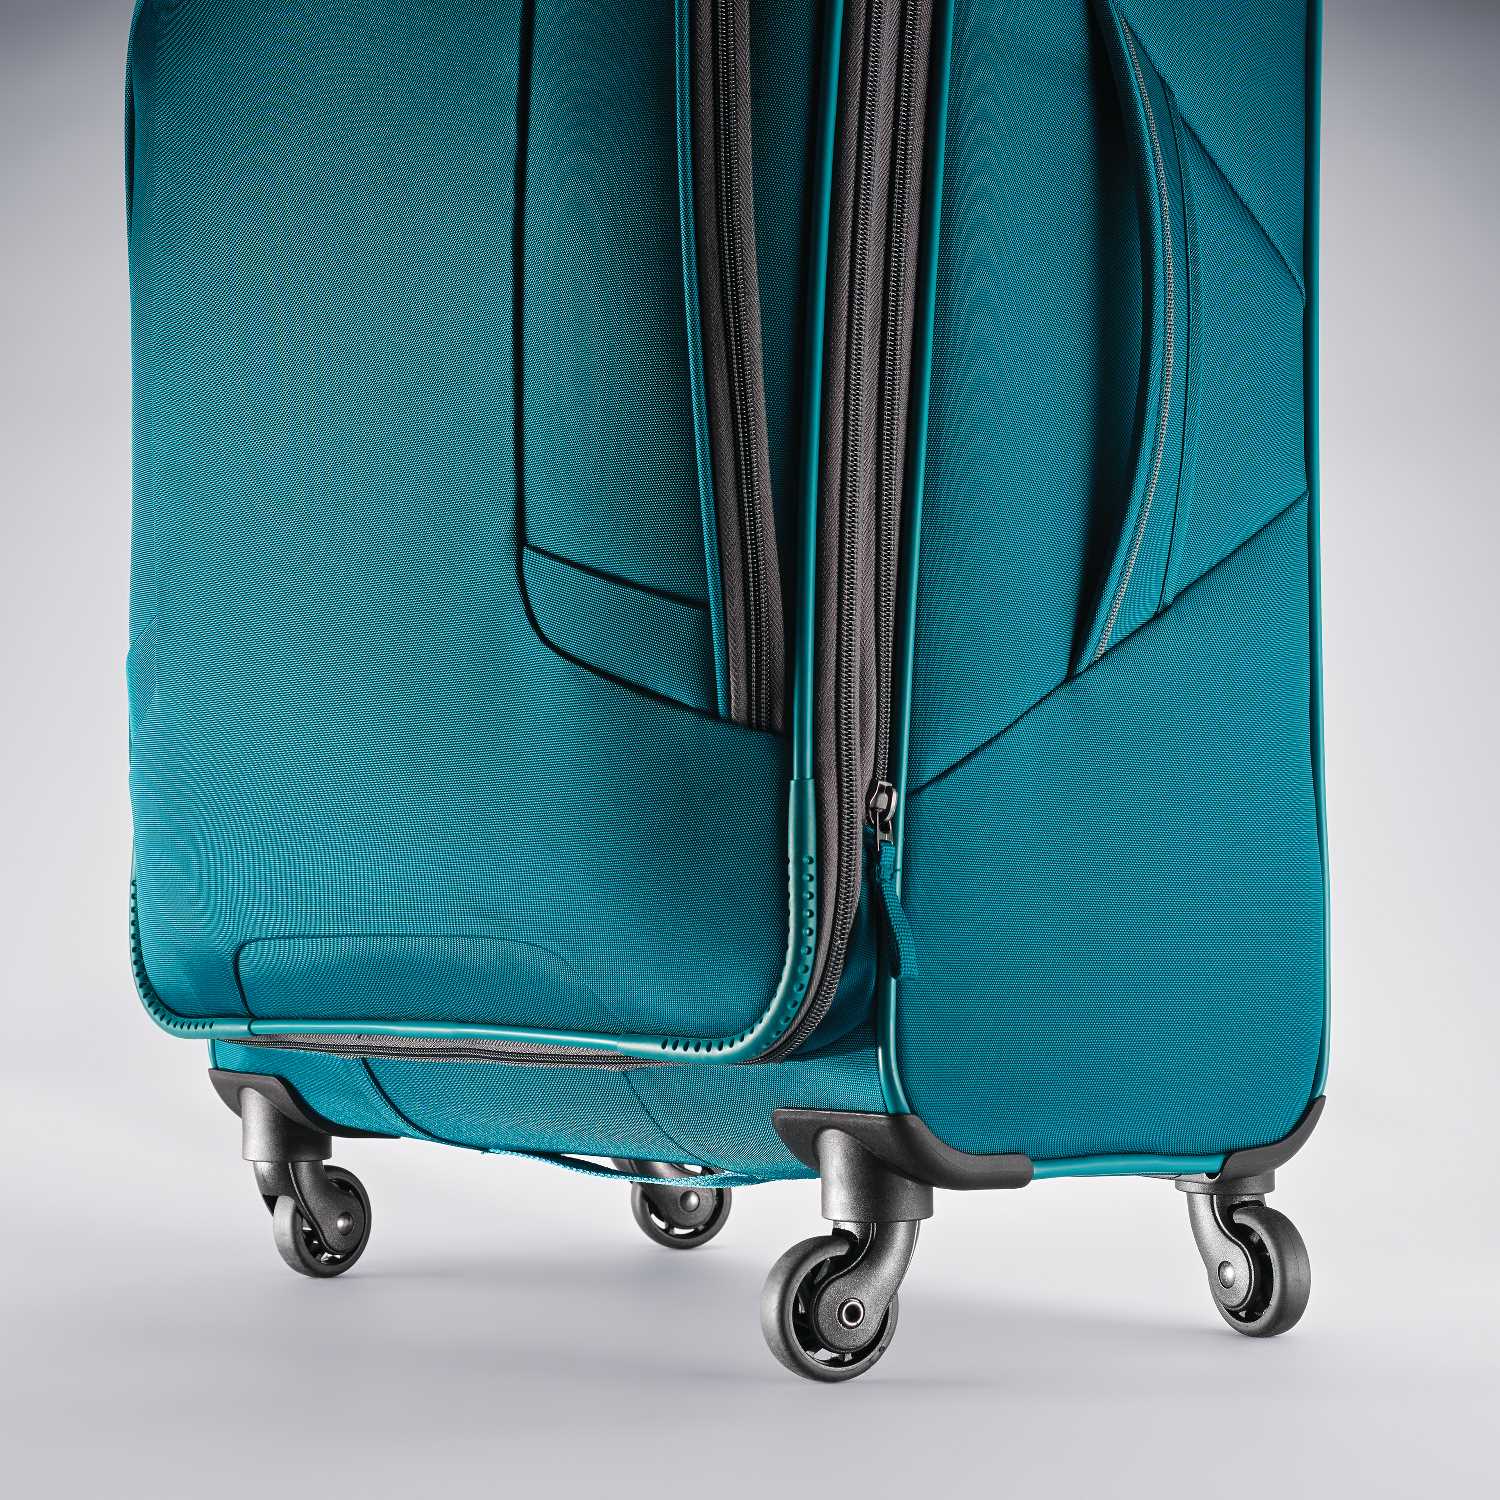 American Tourister 4 Kix 21-inch Softside Spinner, Carry-On Luggage, One Piece - image 3 of 6